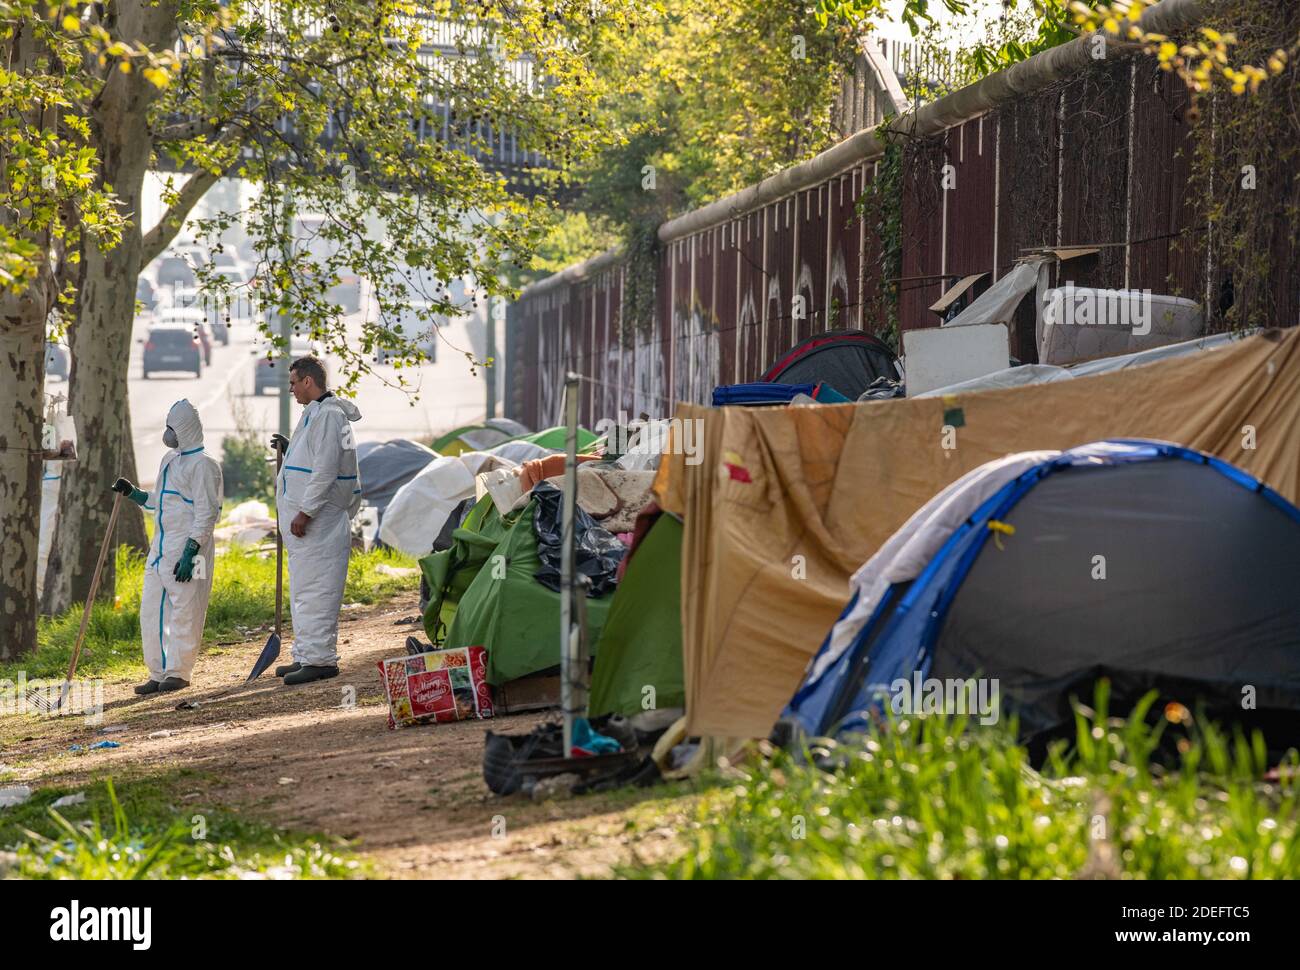 A camp of migrants located Porte d'Aubervilliers in Paris, France along the  Boulevard Périphérique was evacuated on April 18, 2019. Photo by Christophe  Geyres/ABACAPRESS.COM Stock Photo - Alamy